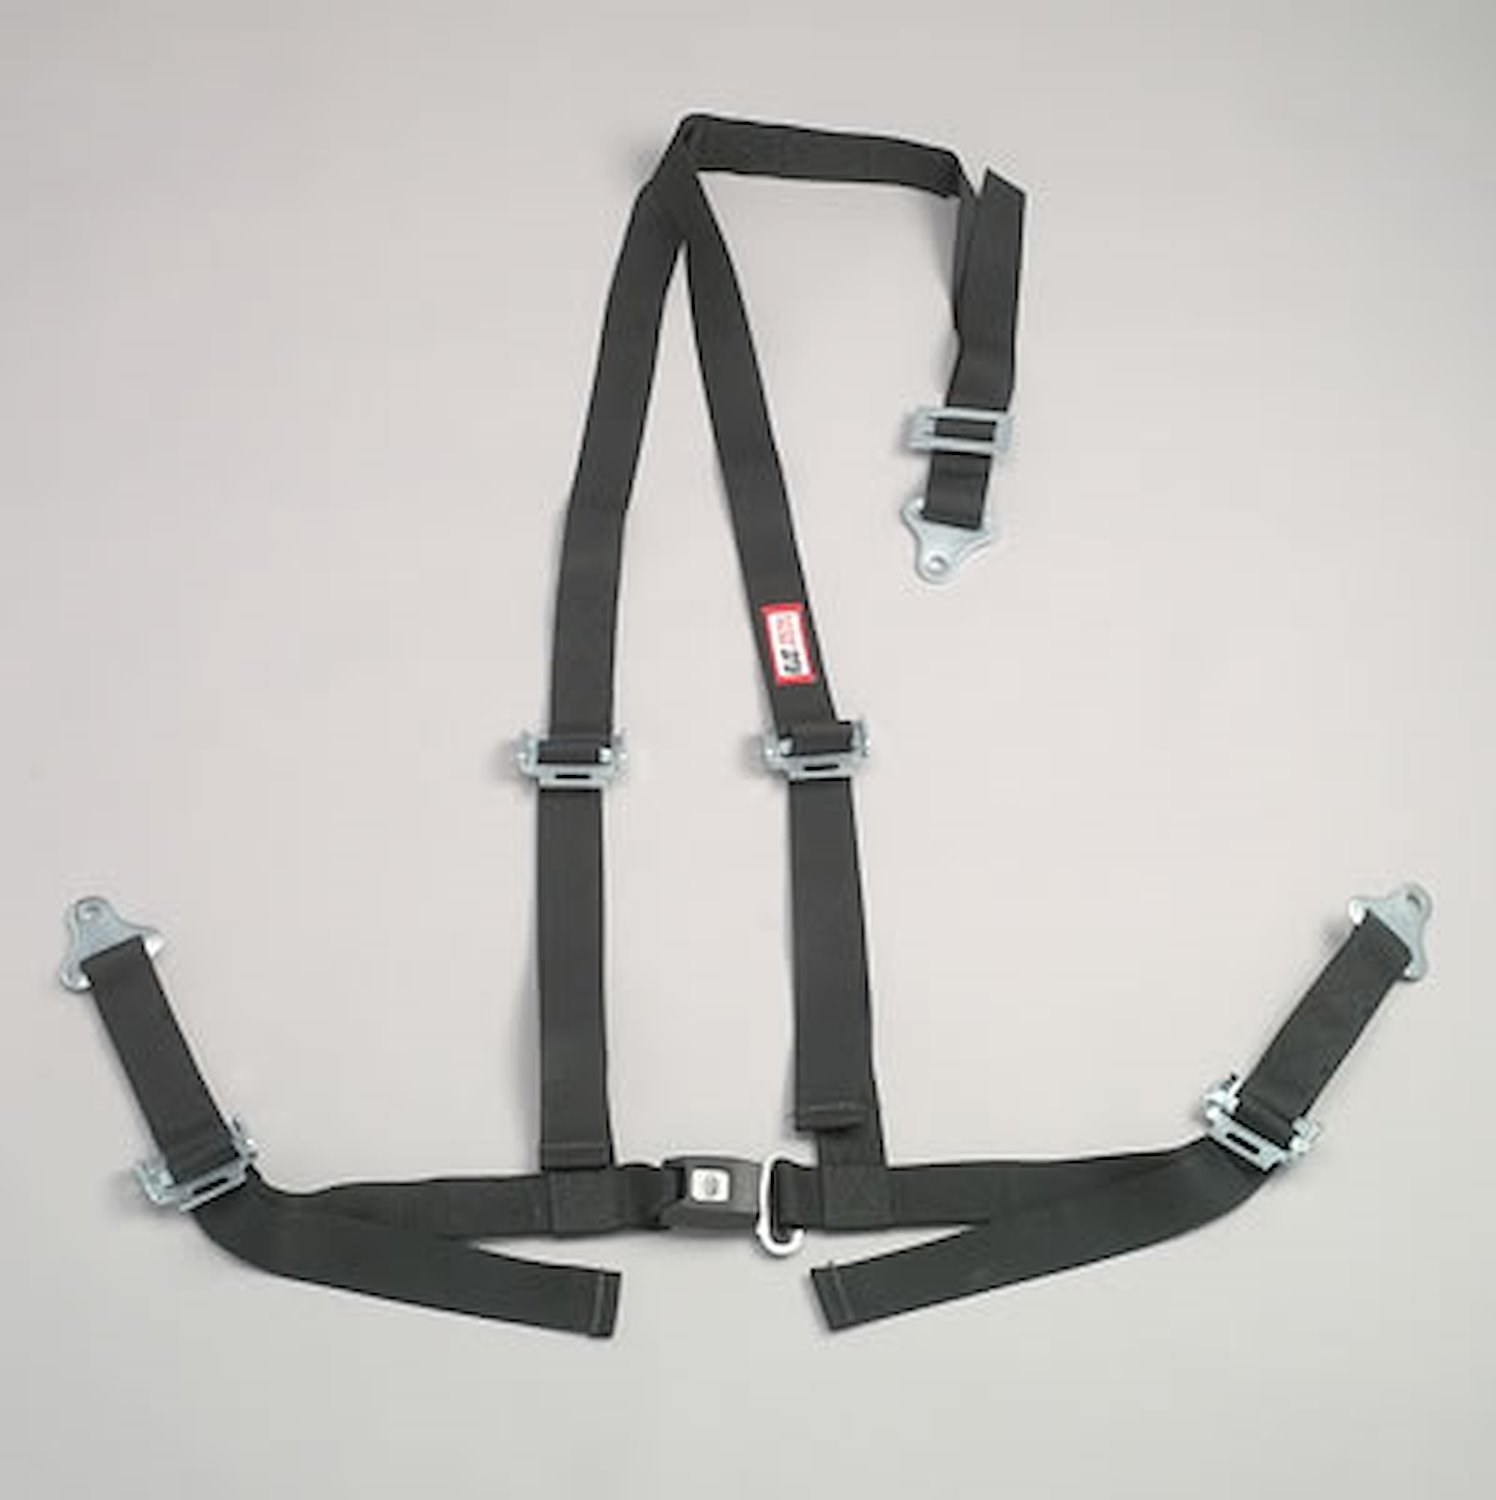 NON-SFI B&T HARNESS 2 PULL DOWN Lap Belt 2 S.H. INDIVIDUAL FLOOR Mount ALL WRAP ENDS BLACK